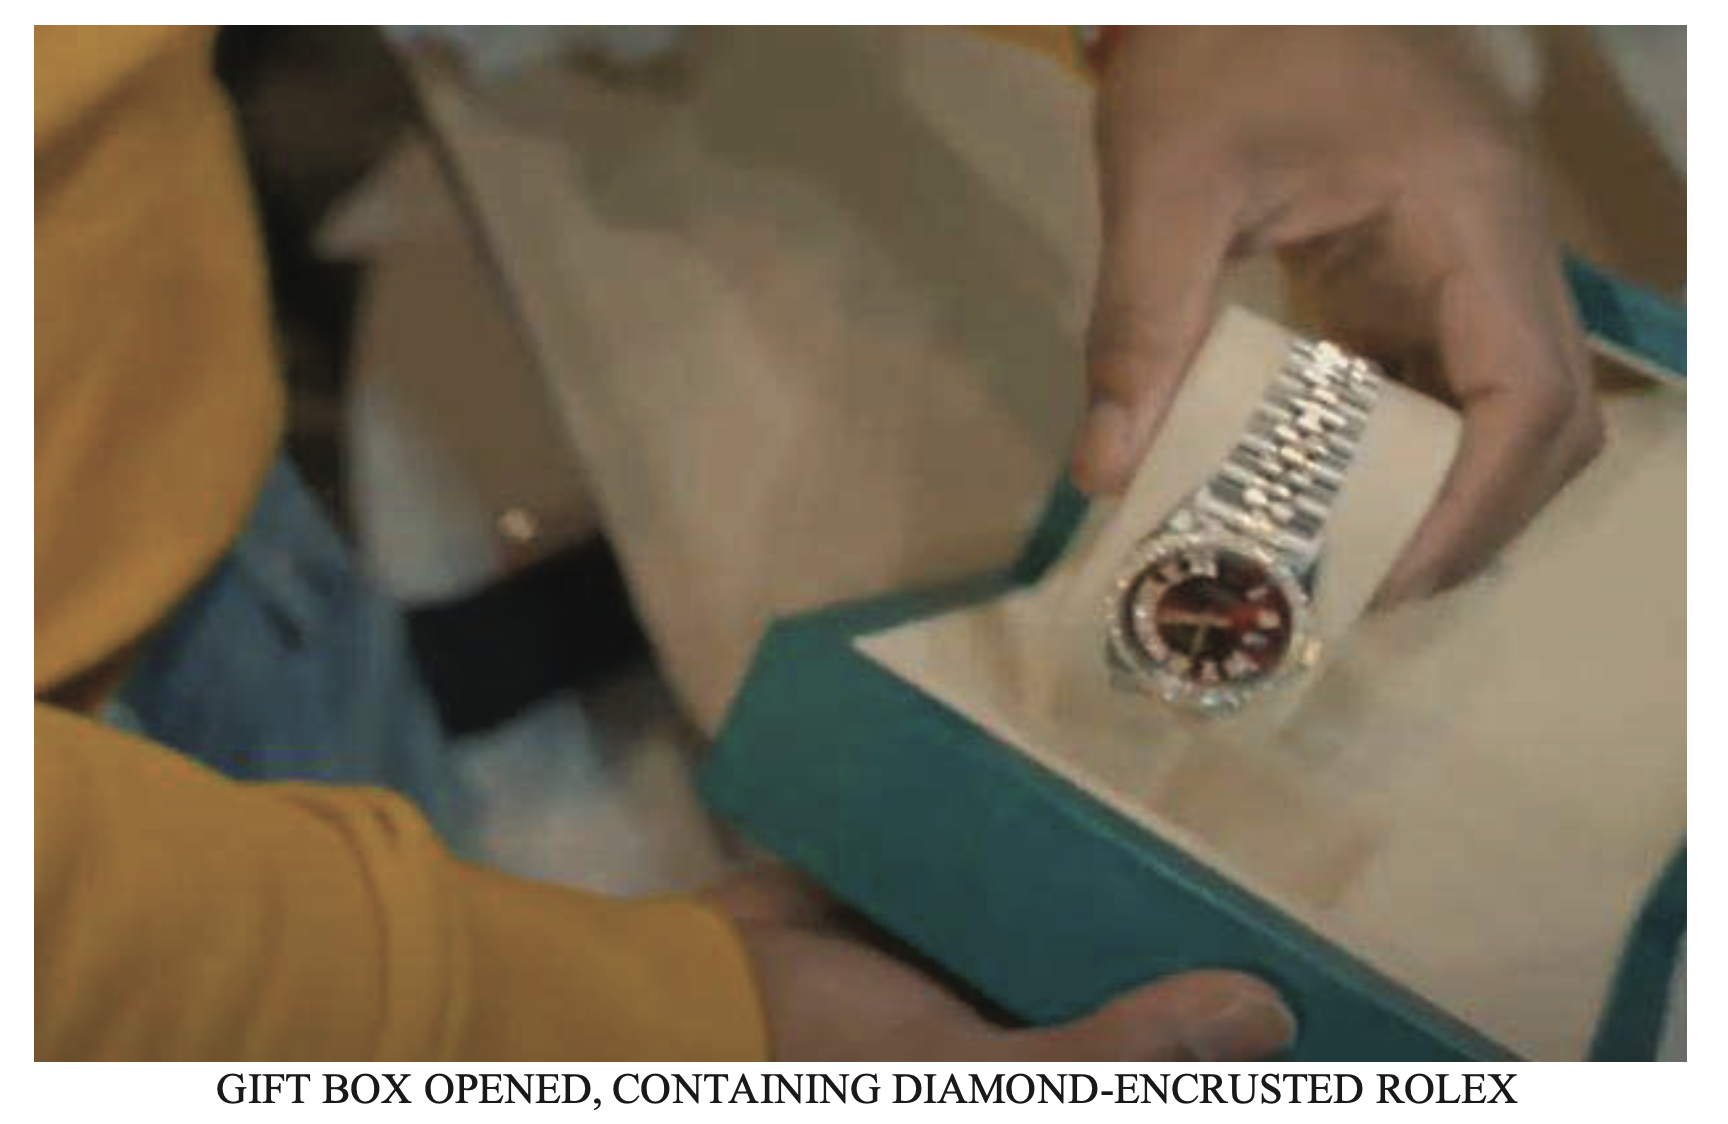 This picture of a diamond-encrusted Rolex is one of many interesting images that appear in the Caruso case's criminal complaint 